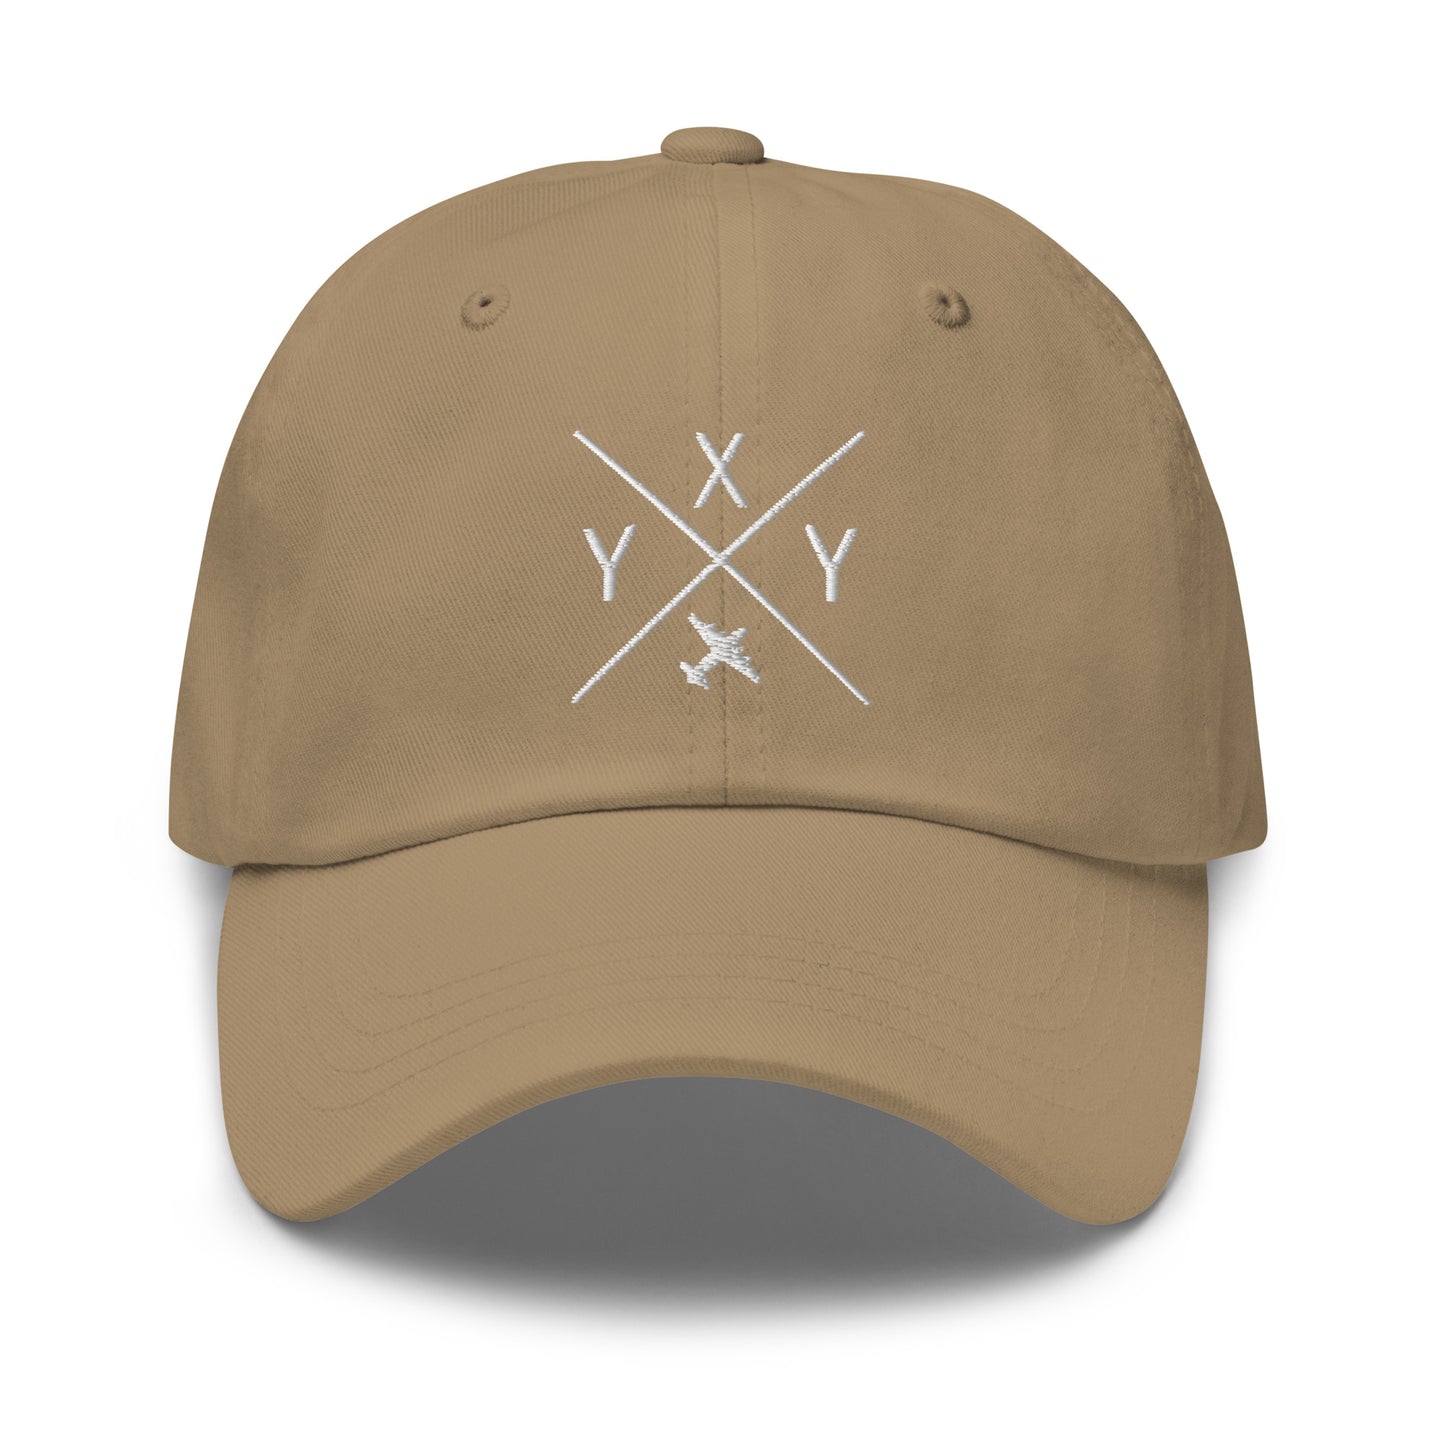 Crossed-X Dad Hat - White • YXY Whitehorse • YHM Designs - Image 15